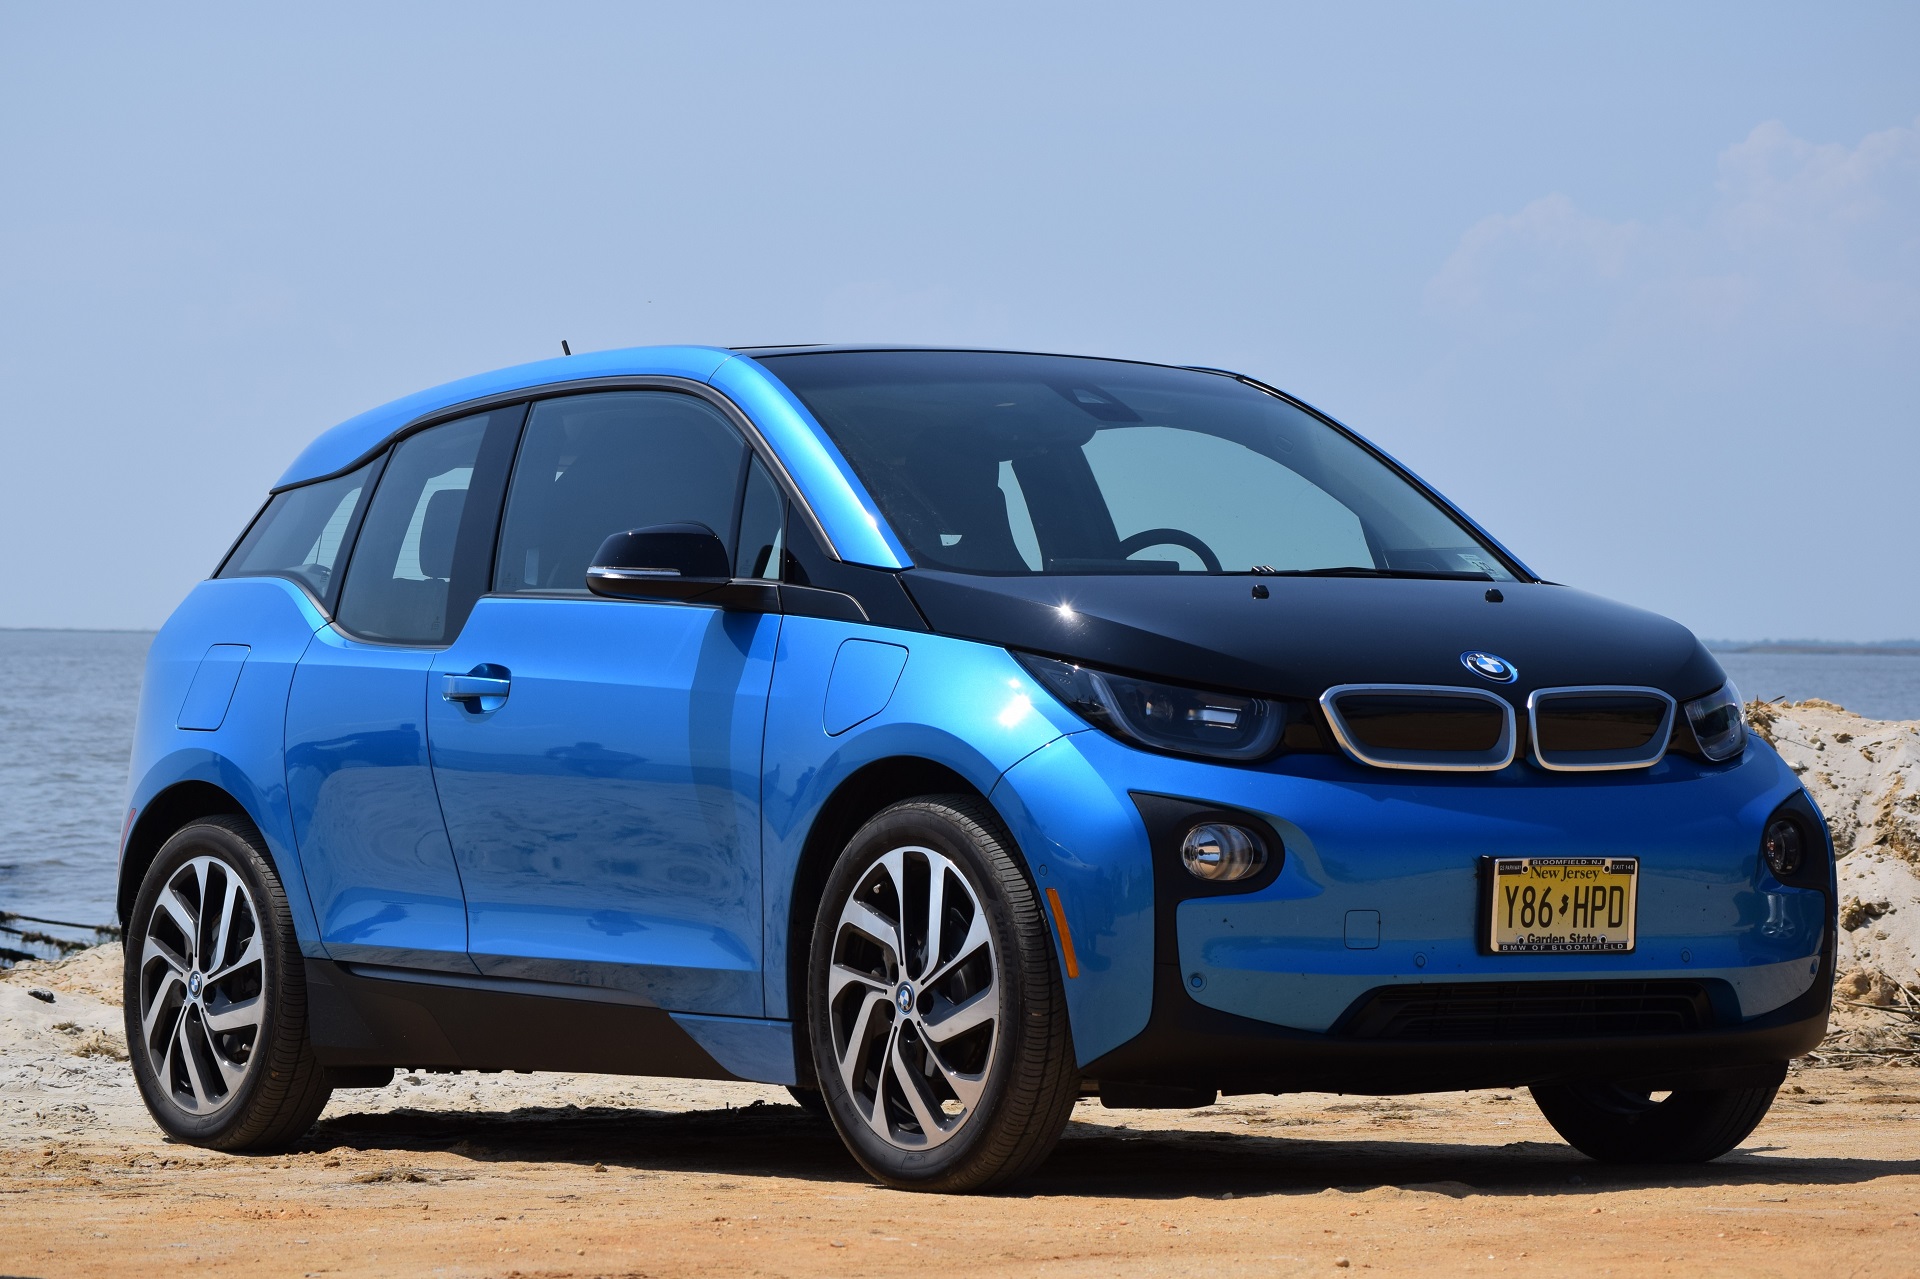 BMW i3 electric car sales stopped, future recall announced for specific